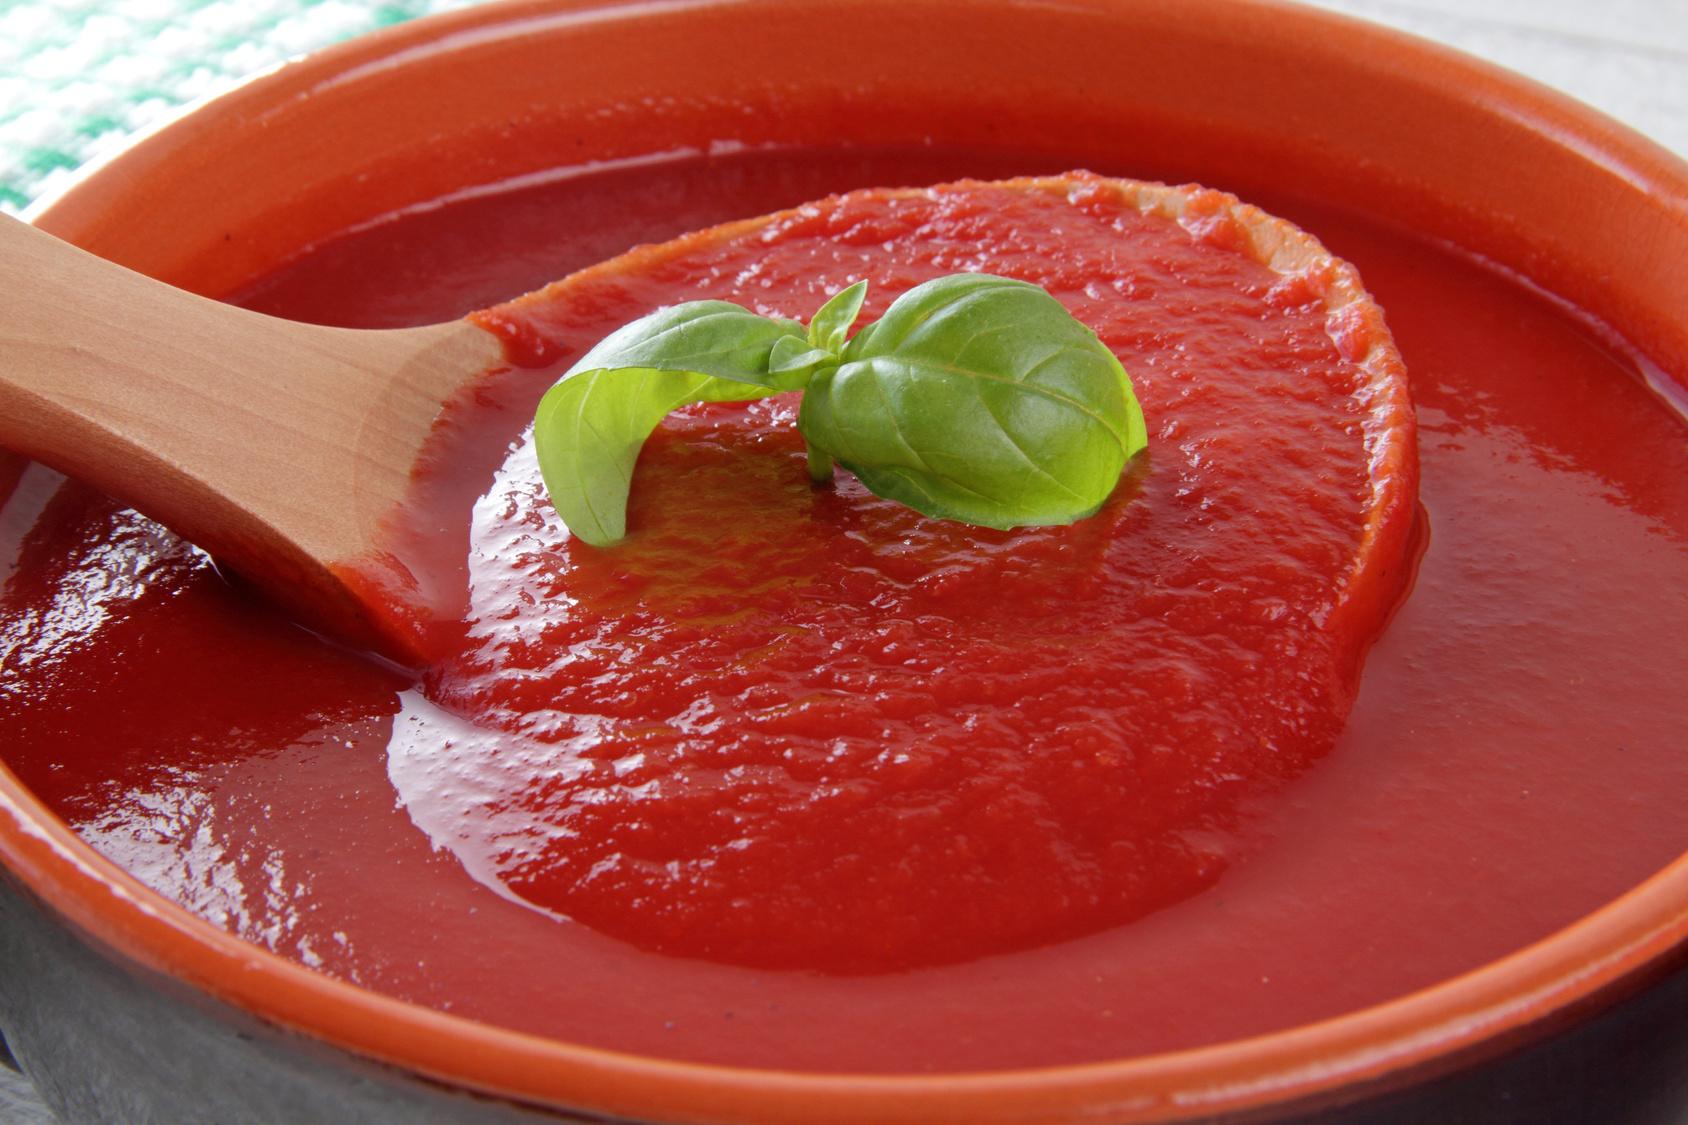 The one and only recipe for Sugo di pomodoro